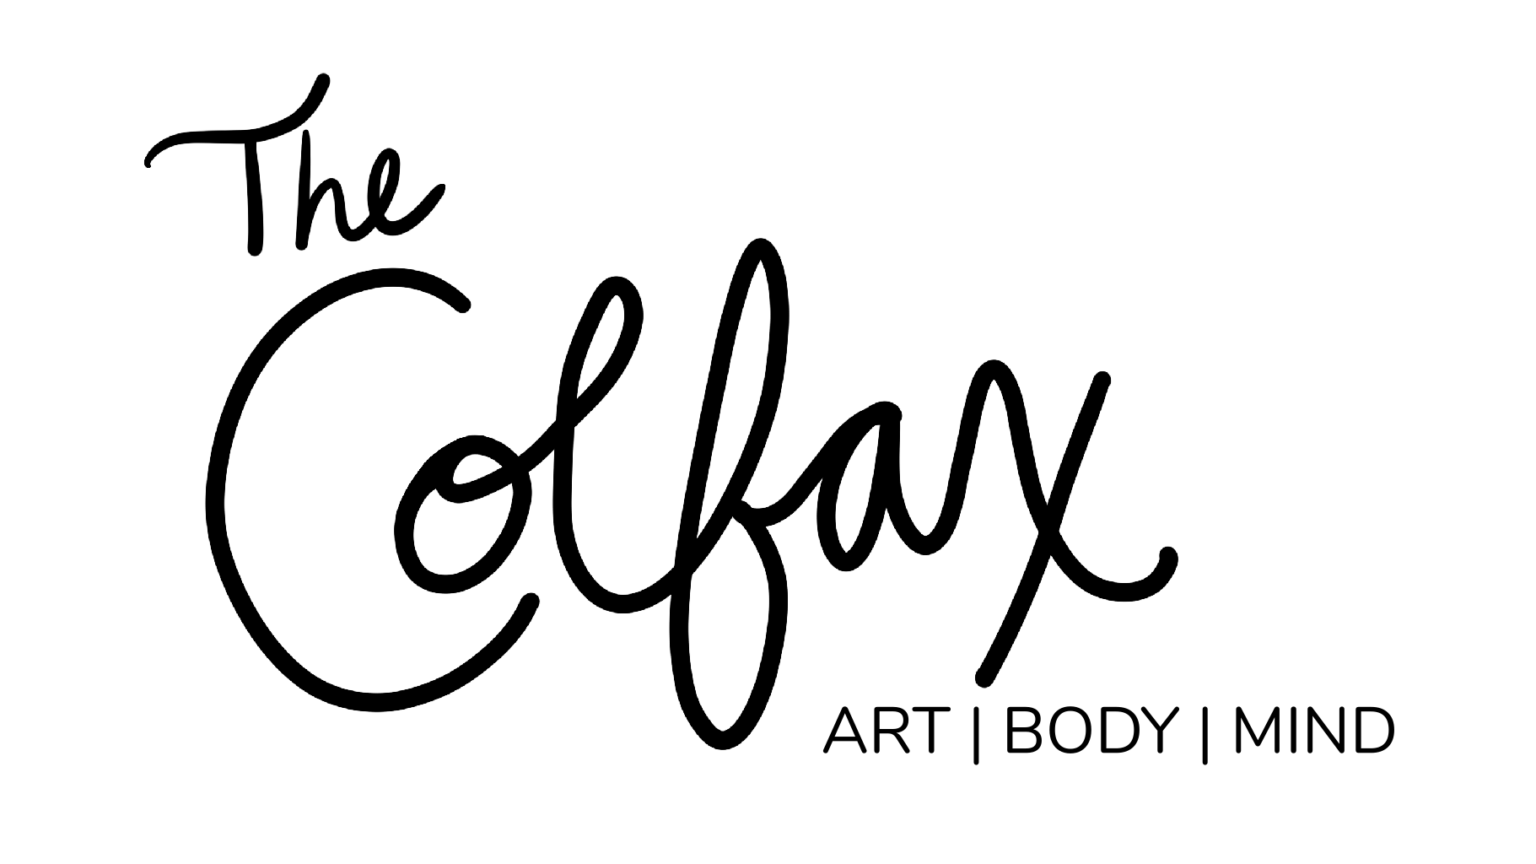 About The Colfax